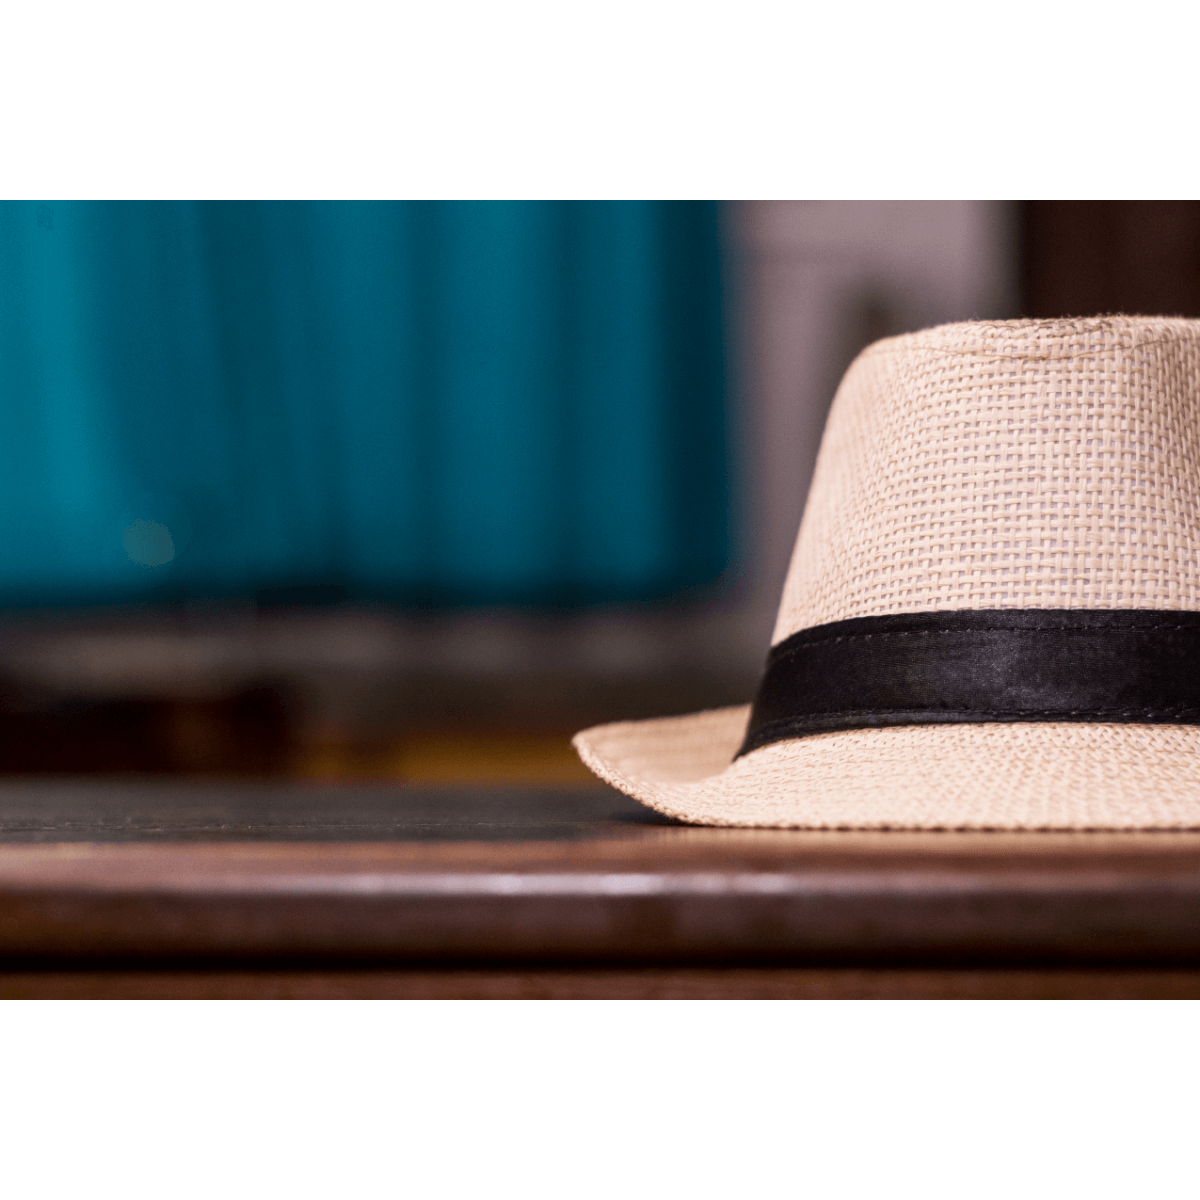 how to reshape a fedora hat